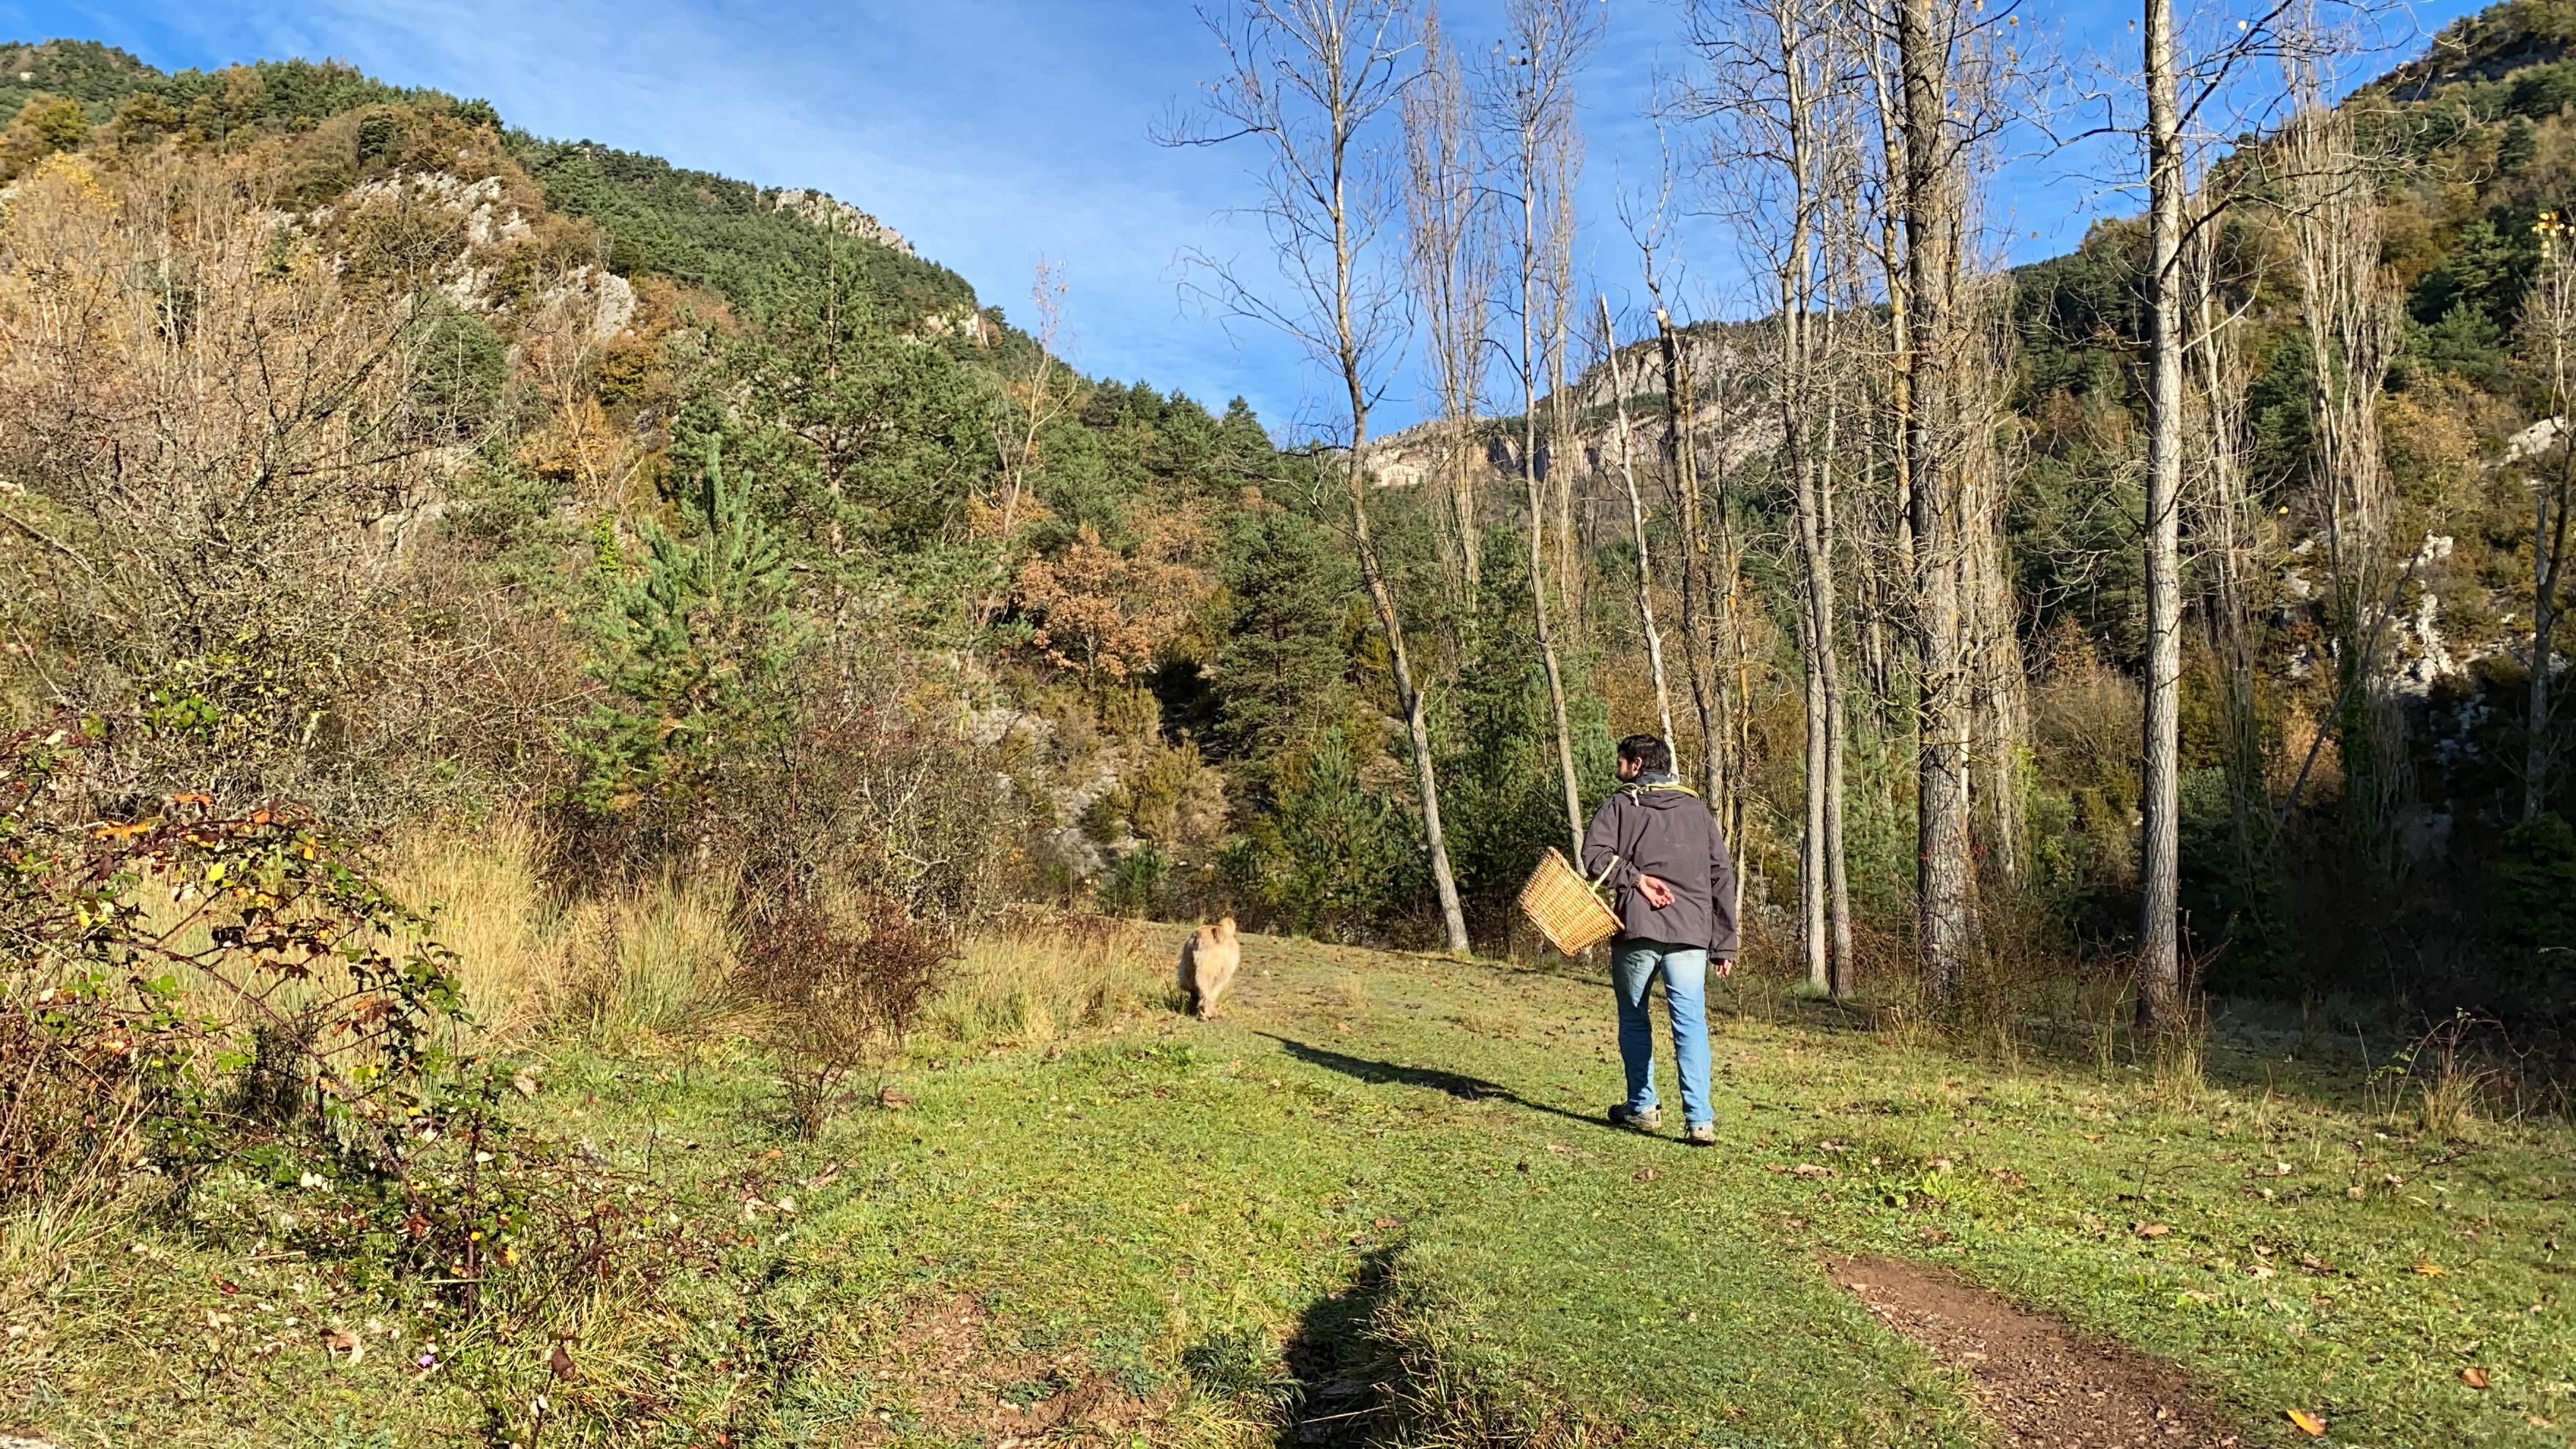 Aniol mushroom hunting in the Pyrenees with his faithful dog Whiskey (by Alan Ruiz Terol)